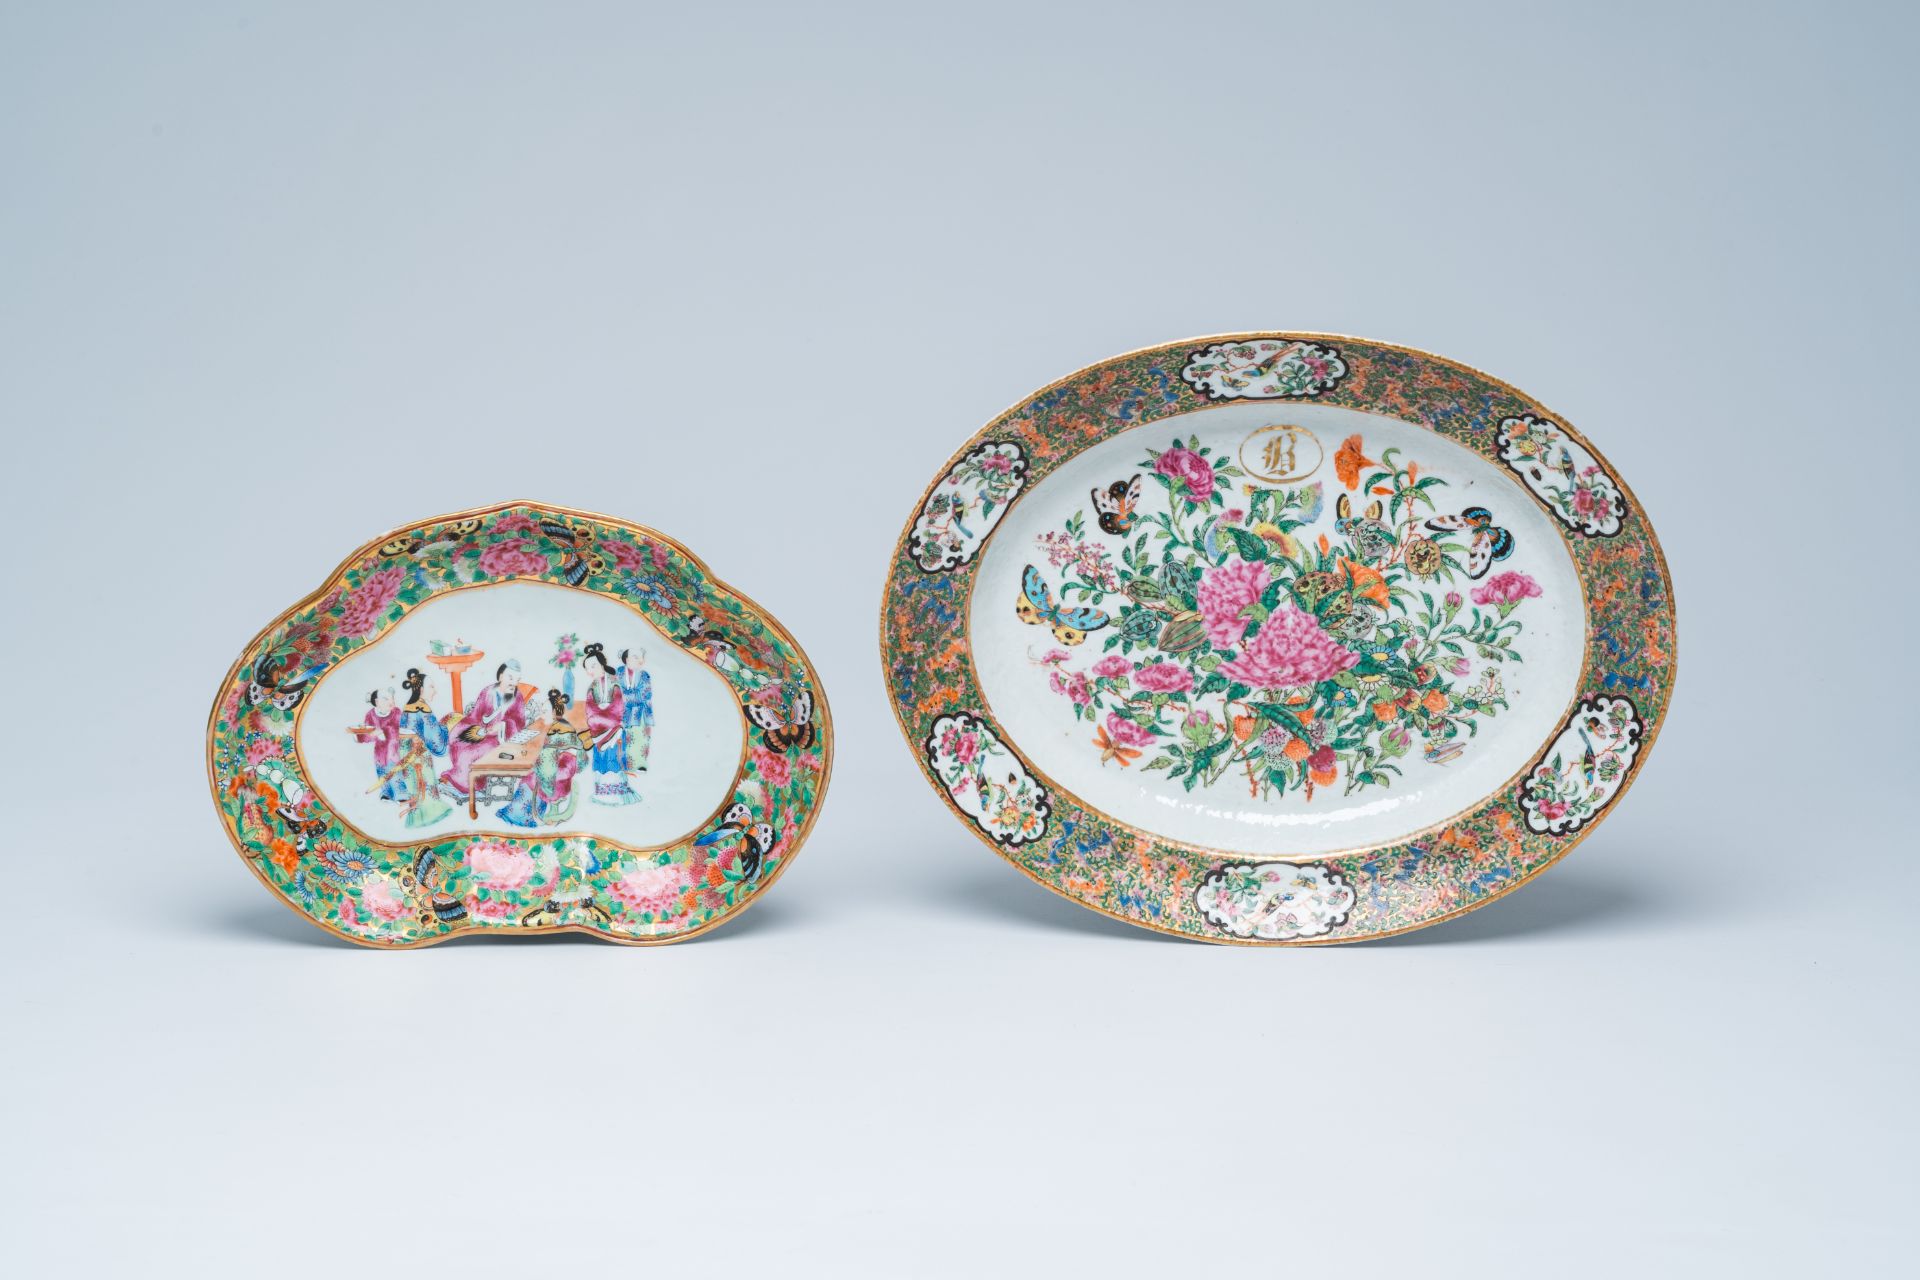 A varied collection of Chinese Canton famille rose porcelain with floral design and figures, 19th C. - Image 2 of 20